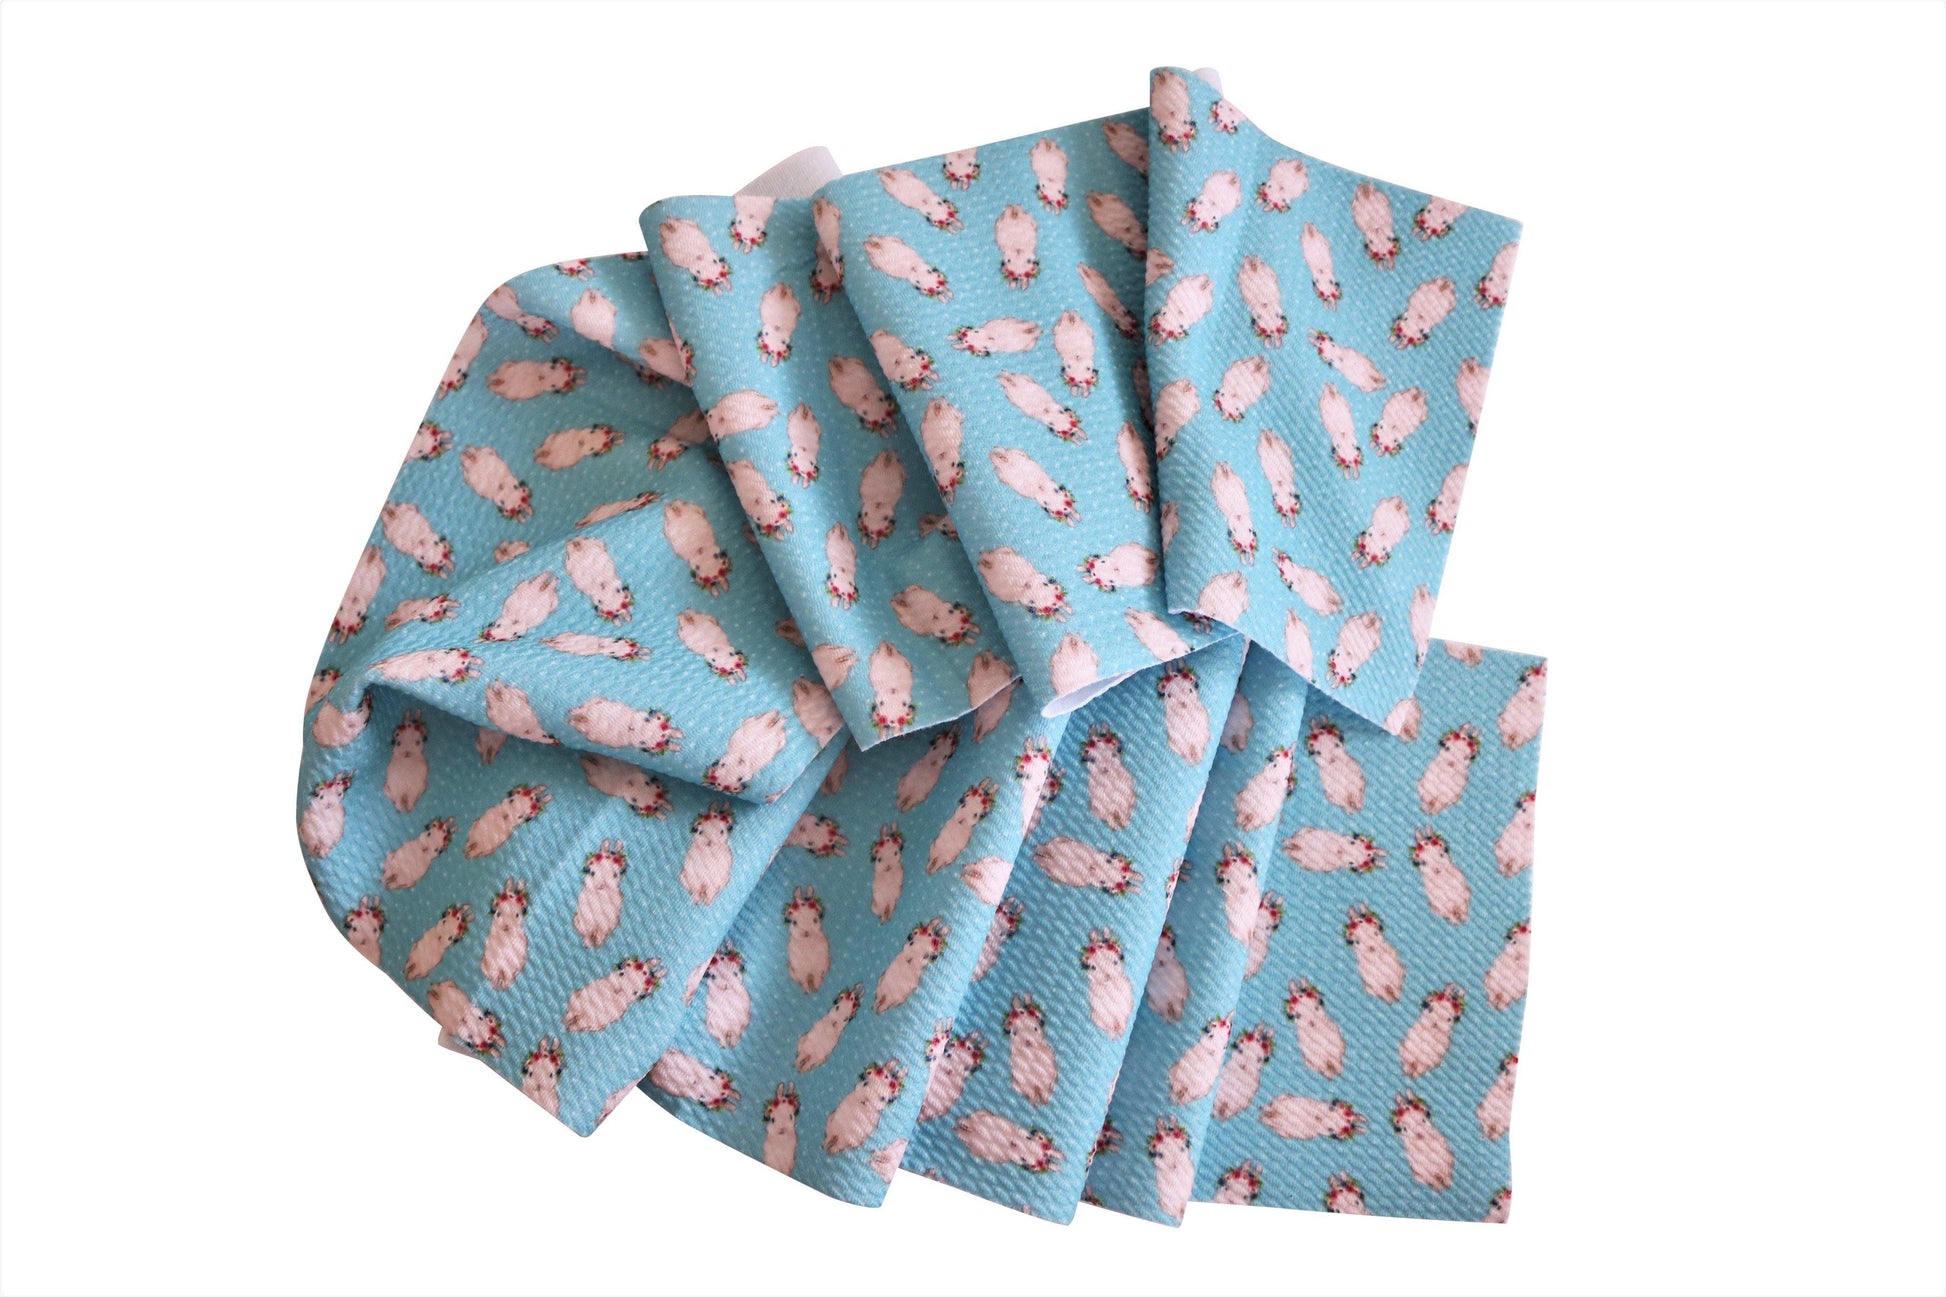 Sweet Dot/Floral Bunny Liverpool Fabric - Pretty in Pink Supply